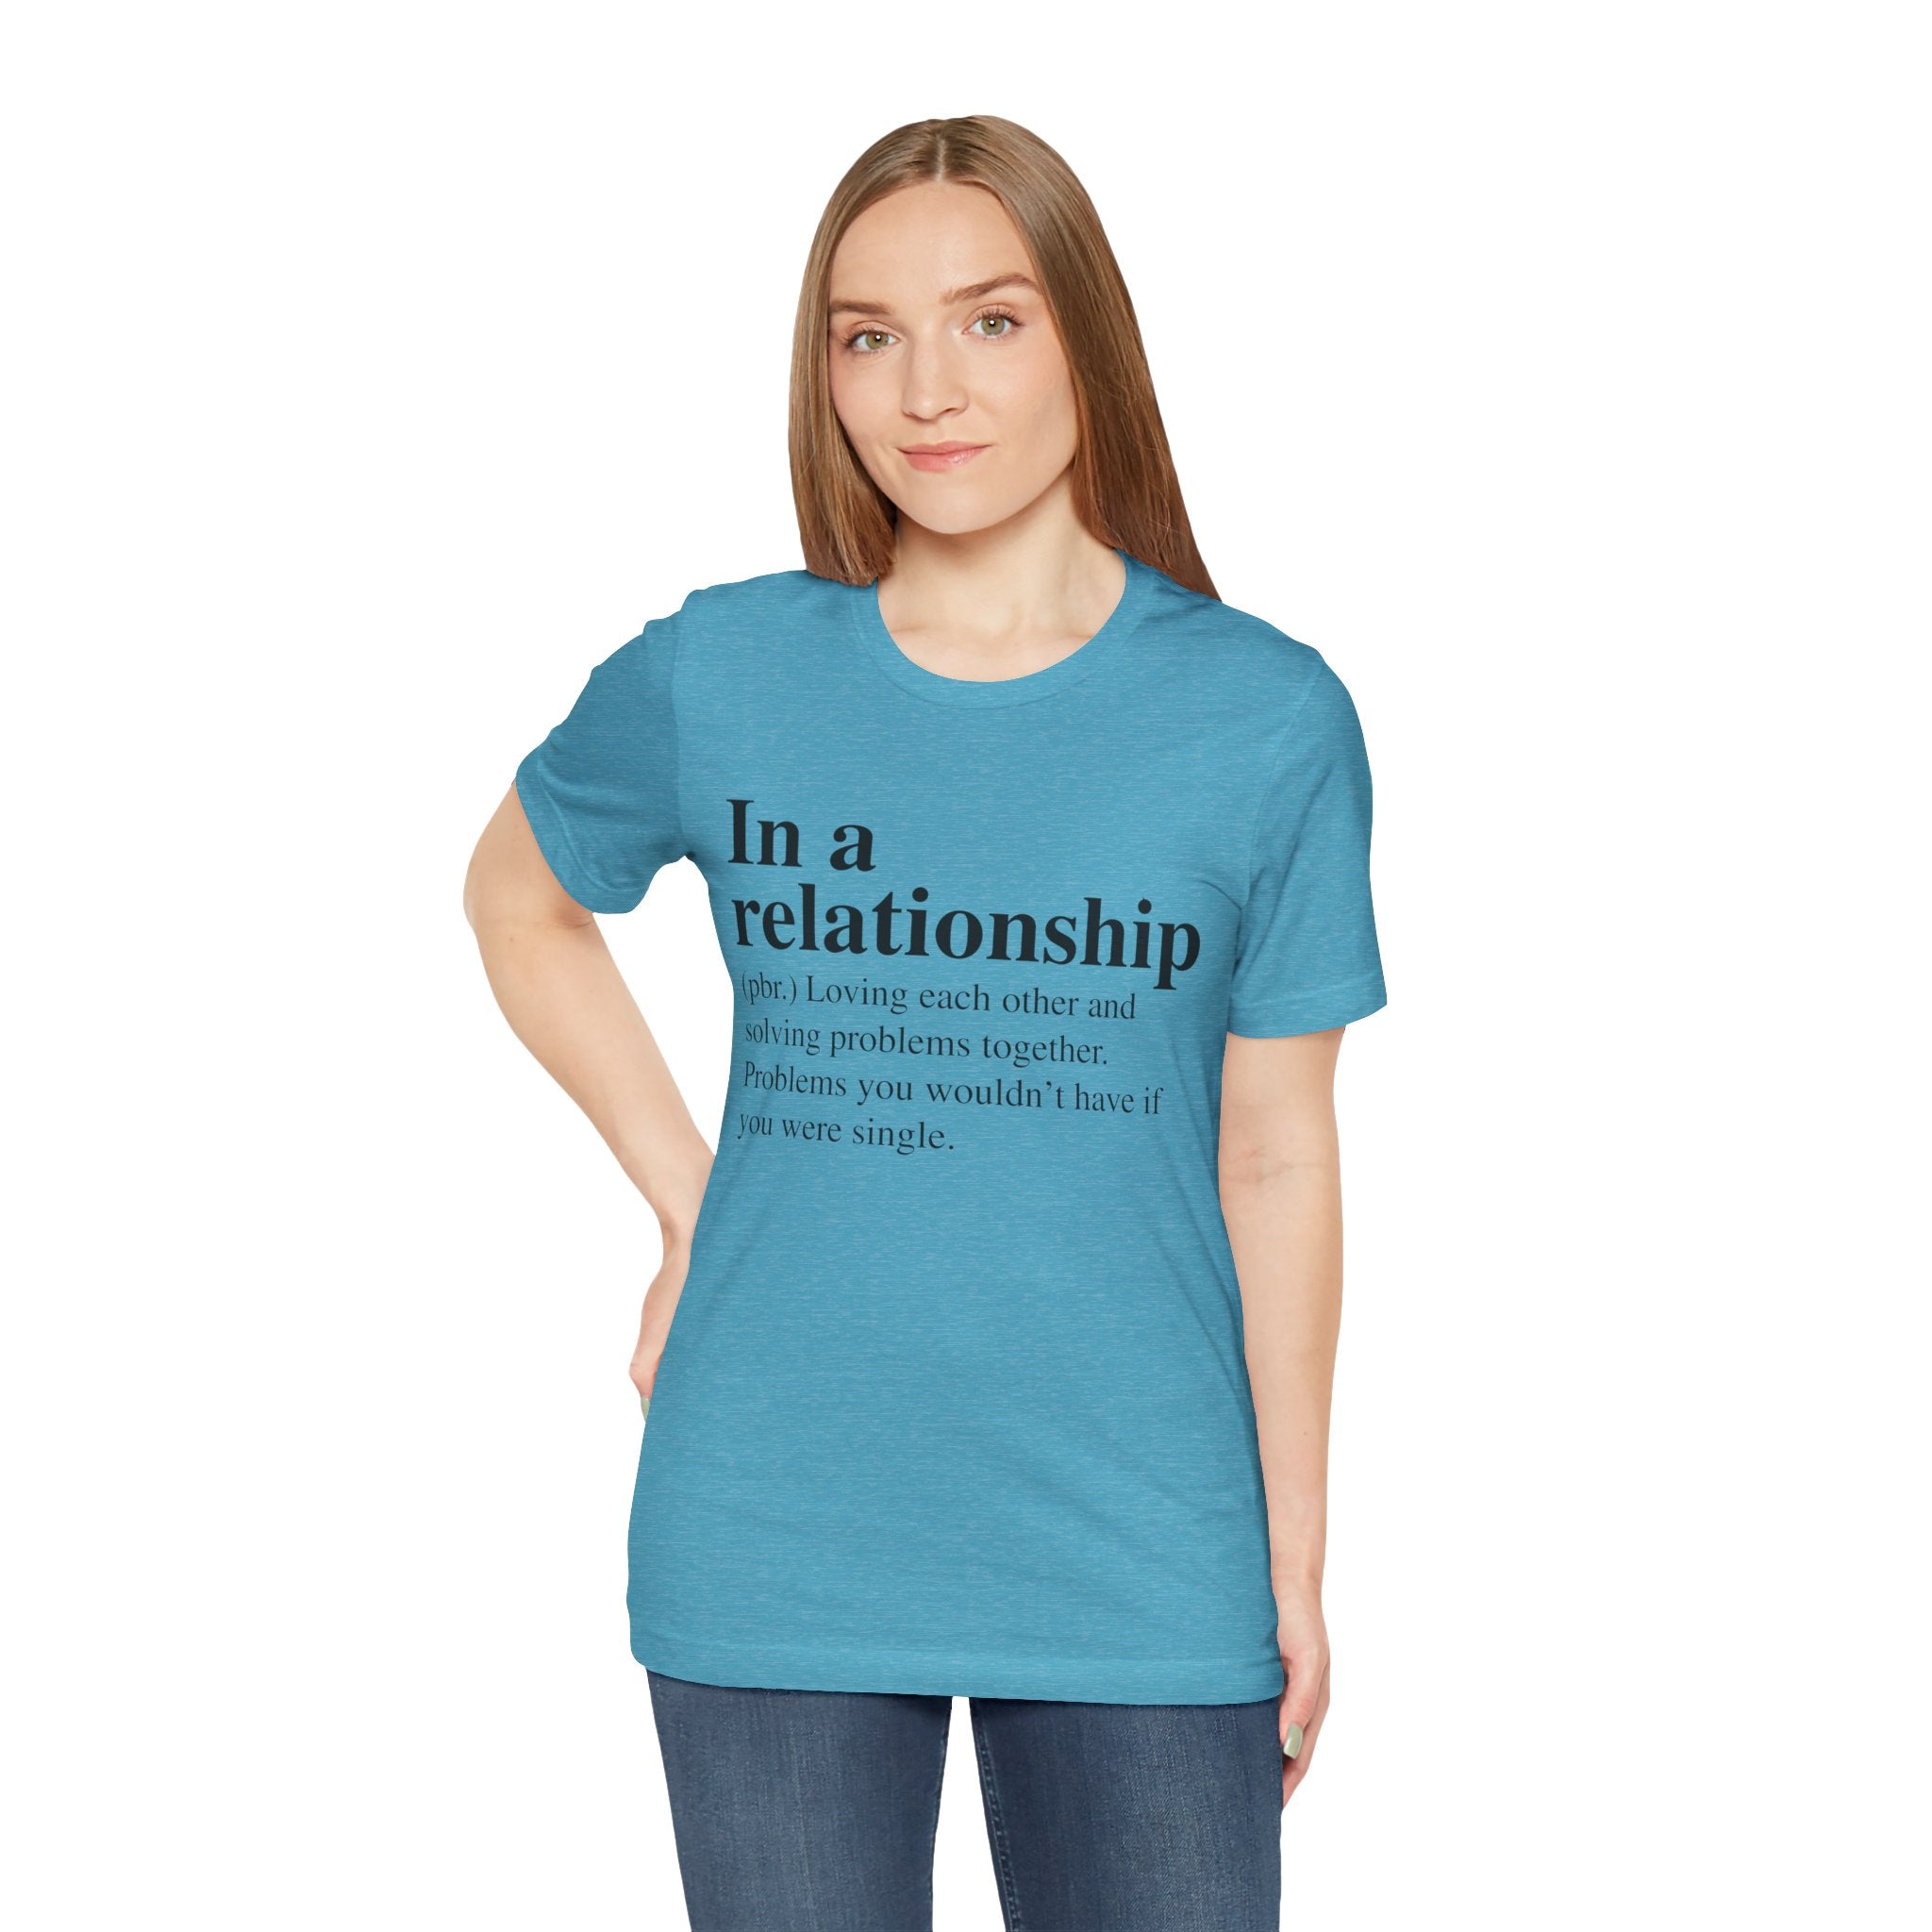 A woman in an In a Relationship T-Shirt stands against a white background.